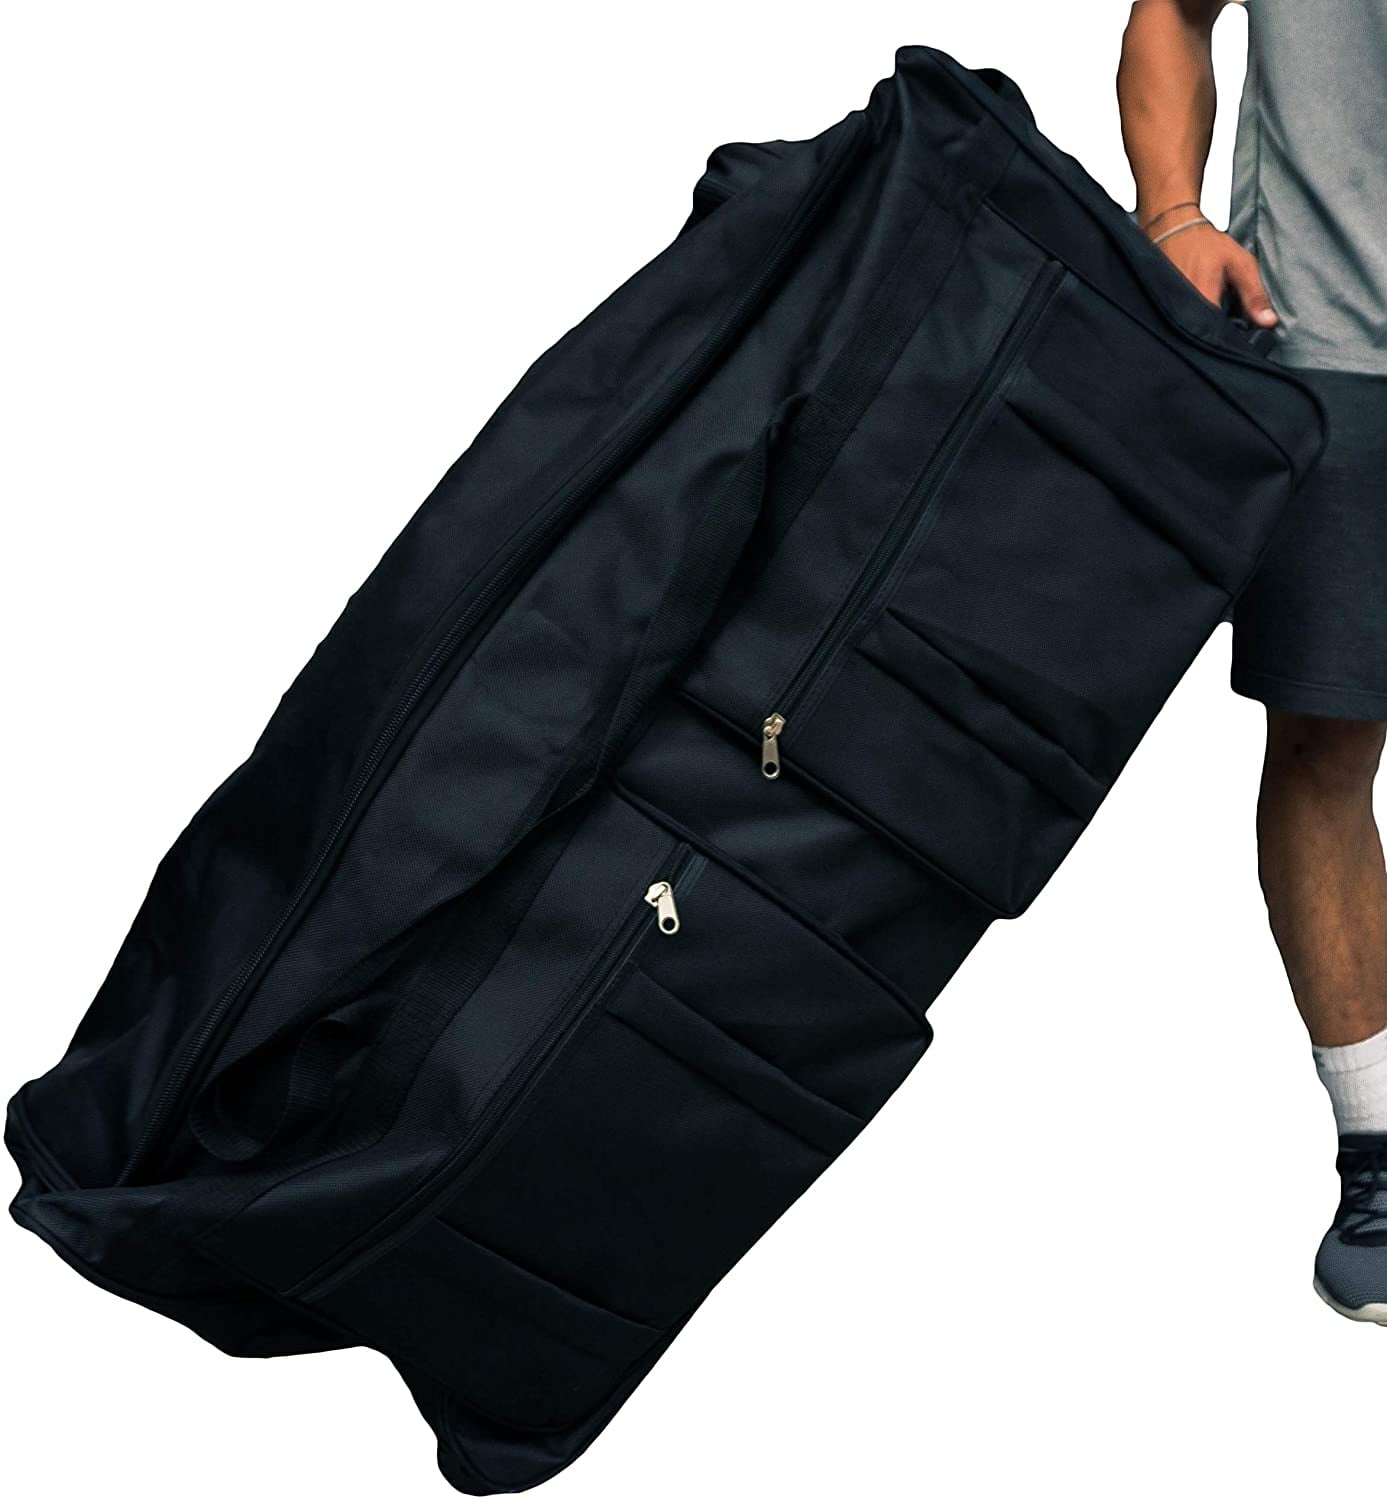 Gothamite 42-inch Rolling Duffle Bag with Wheels, XL Duffle With Rollers Walmart.com